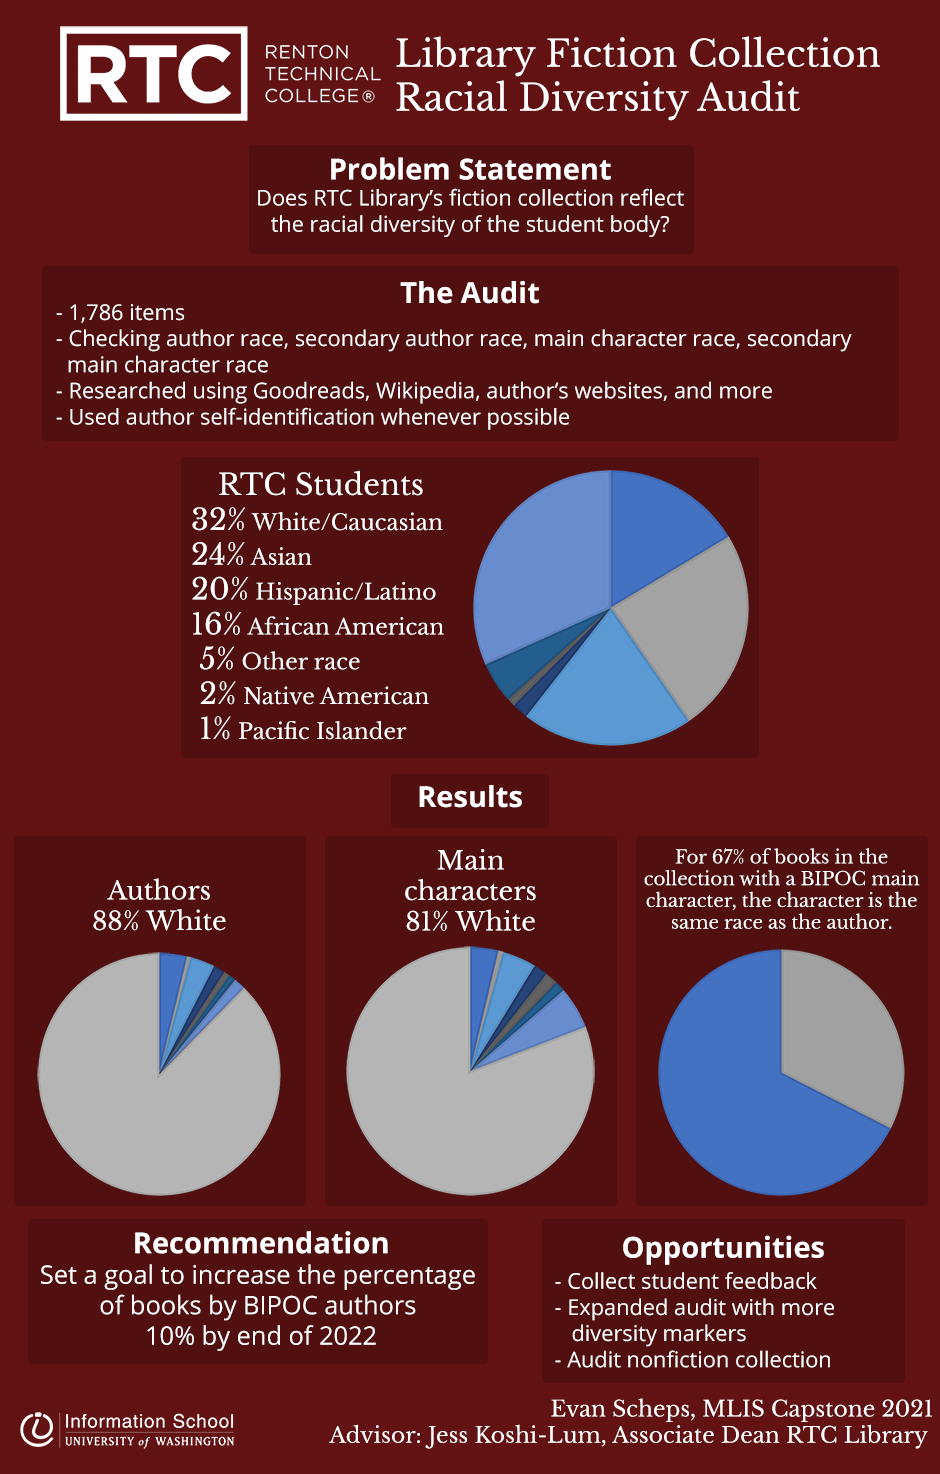 Renton Technical College Library Racial Diversity Audit | Information